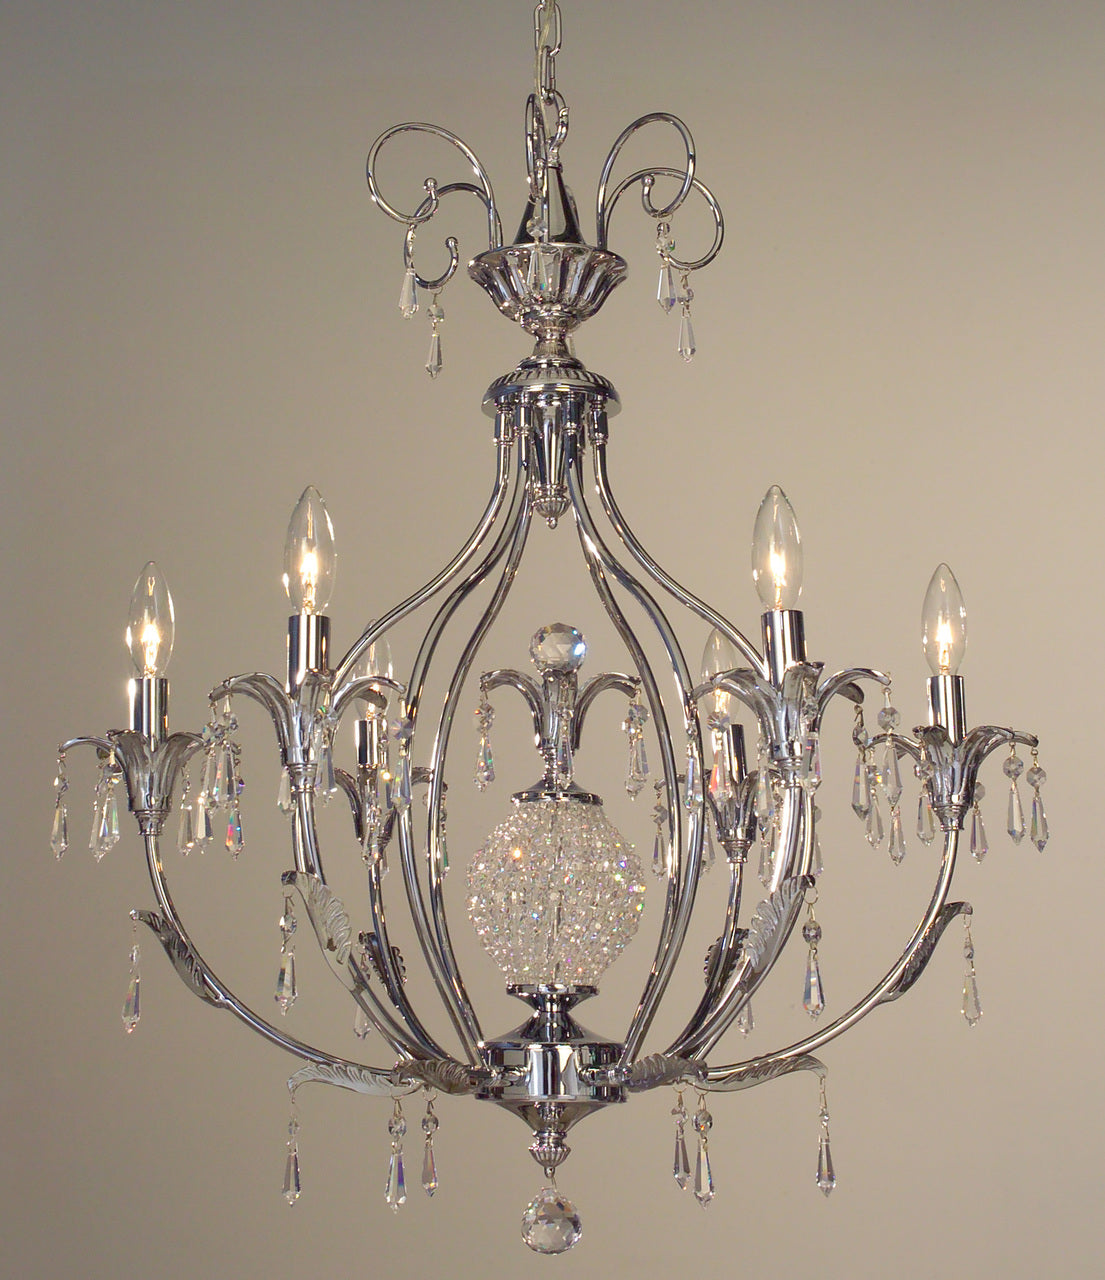 Classic Lighting 16116 CH S Sharon Crystal Chandelier in Chrome